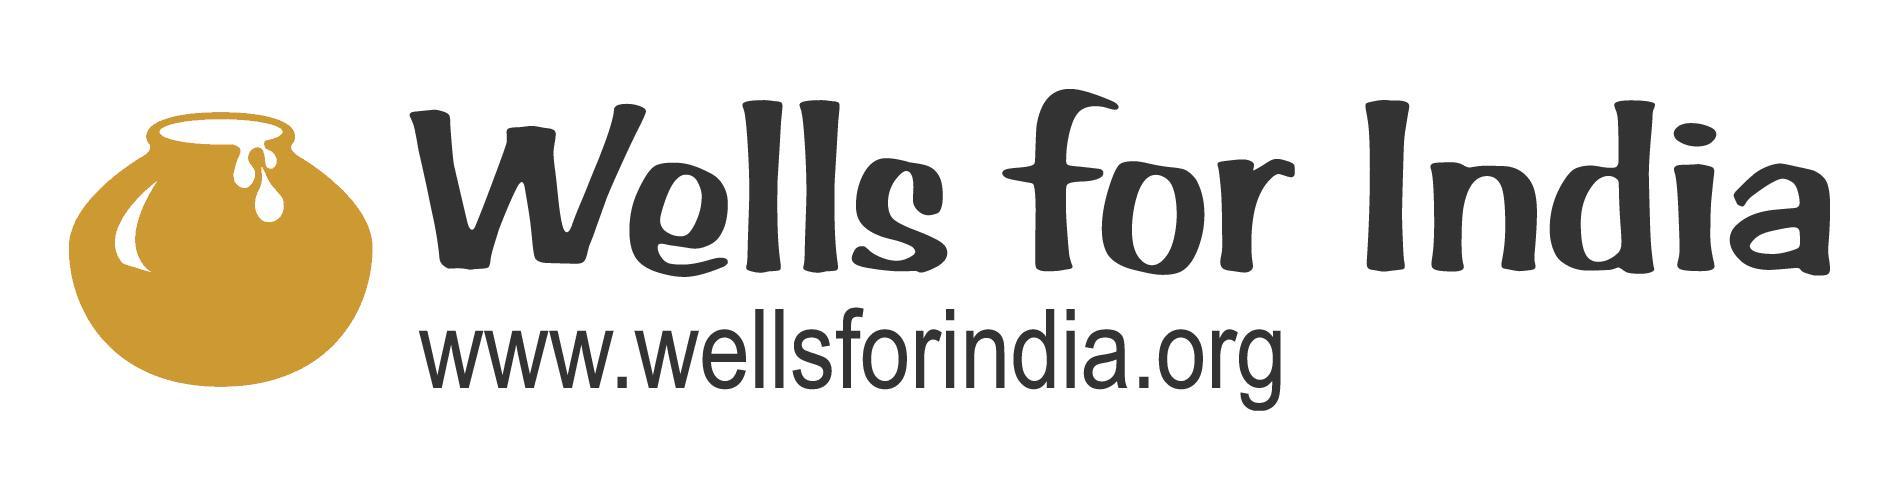 Wells for India